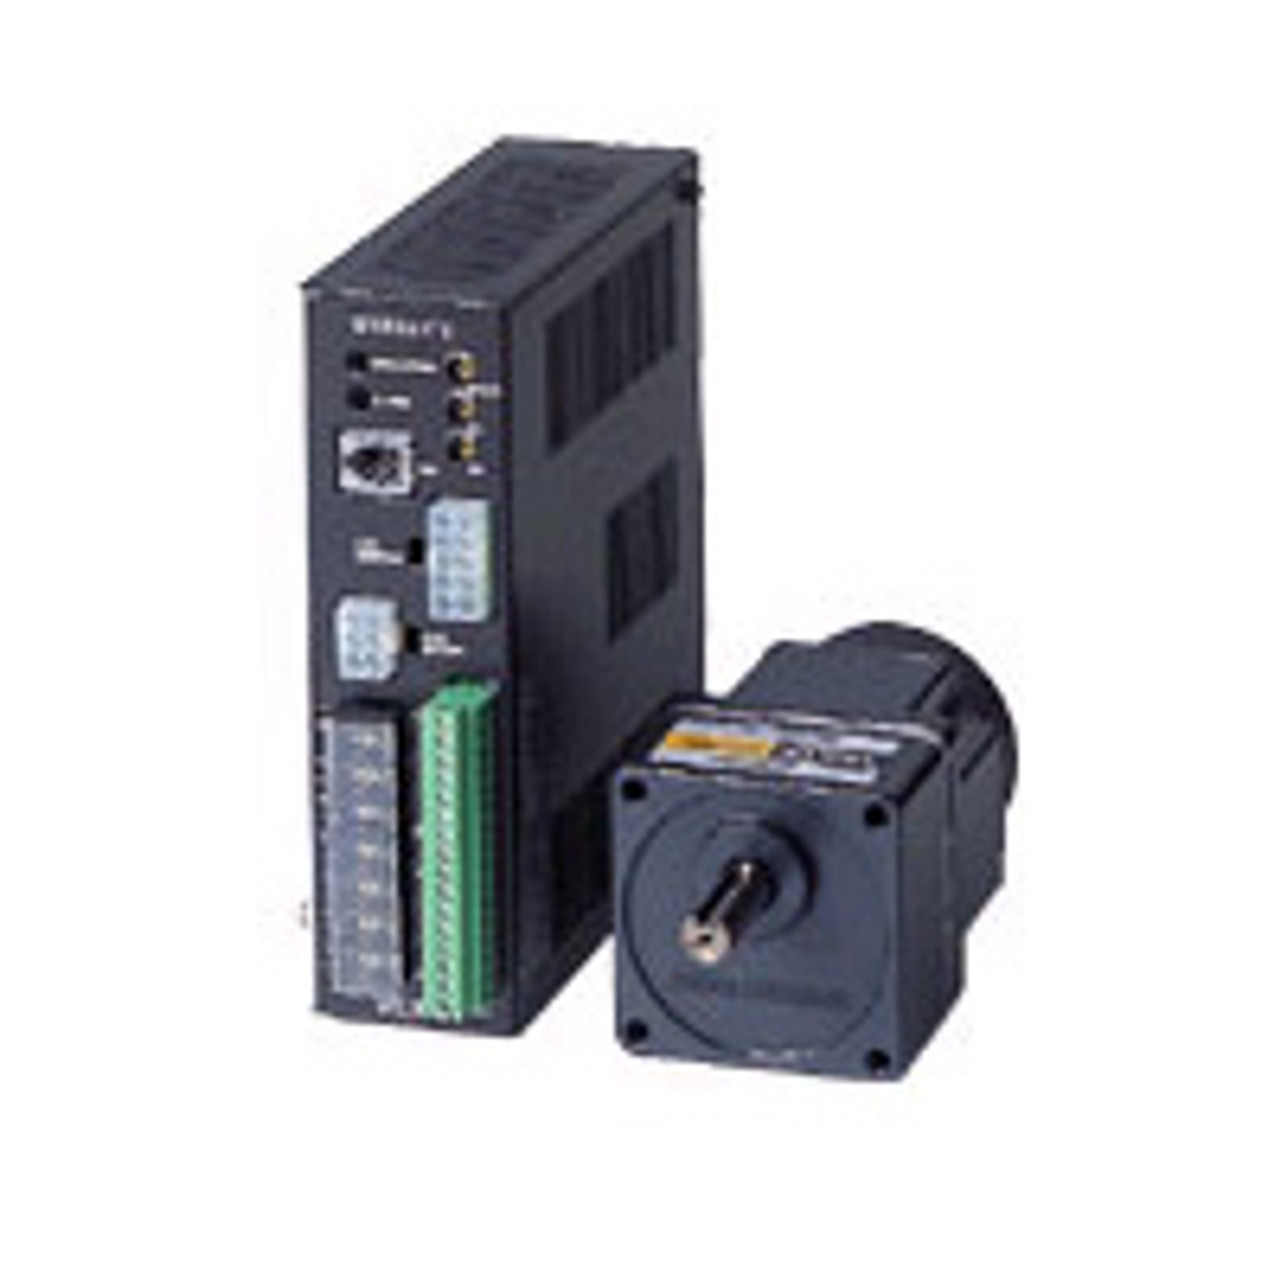 BX230A-100 - Product Image